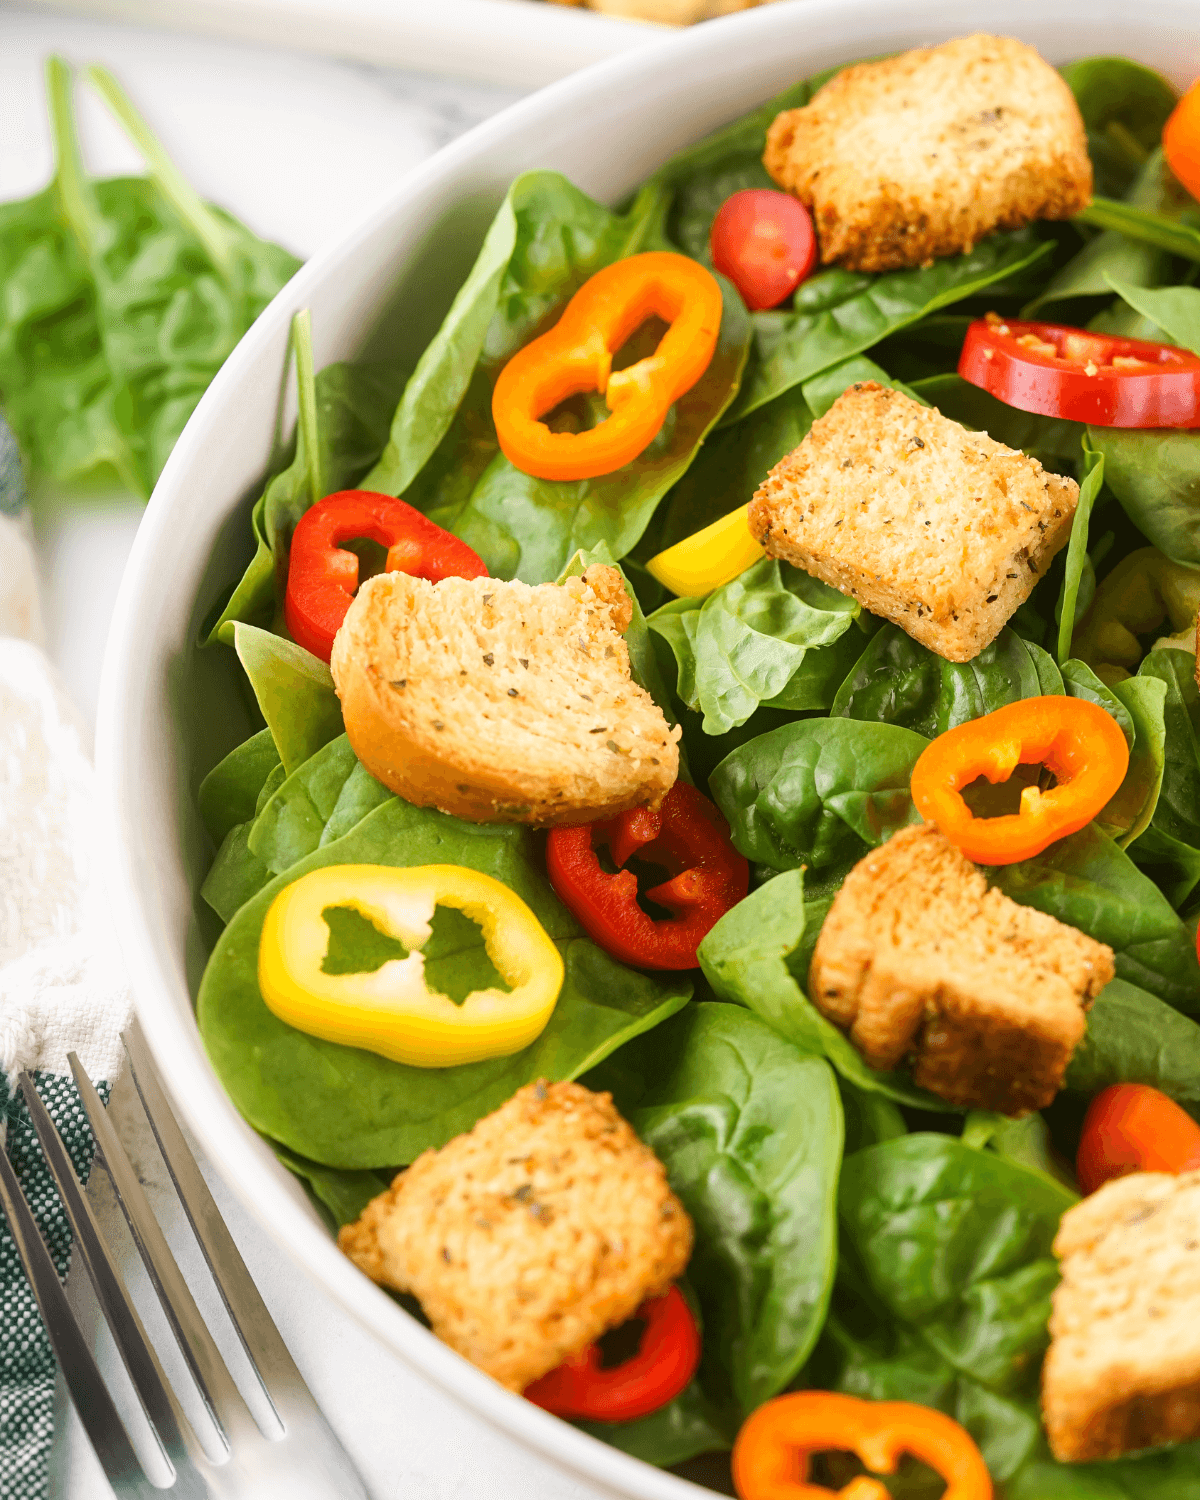 Spinach salad with homemade croutons and peppers.